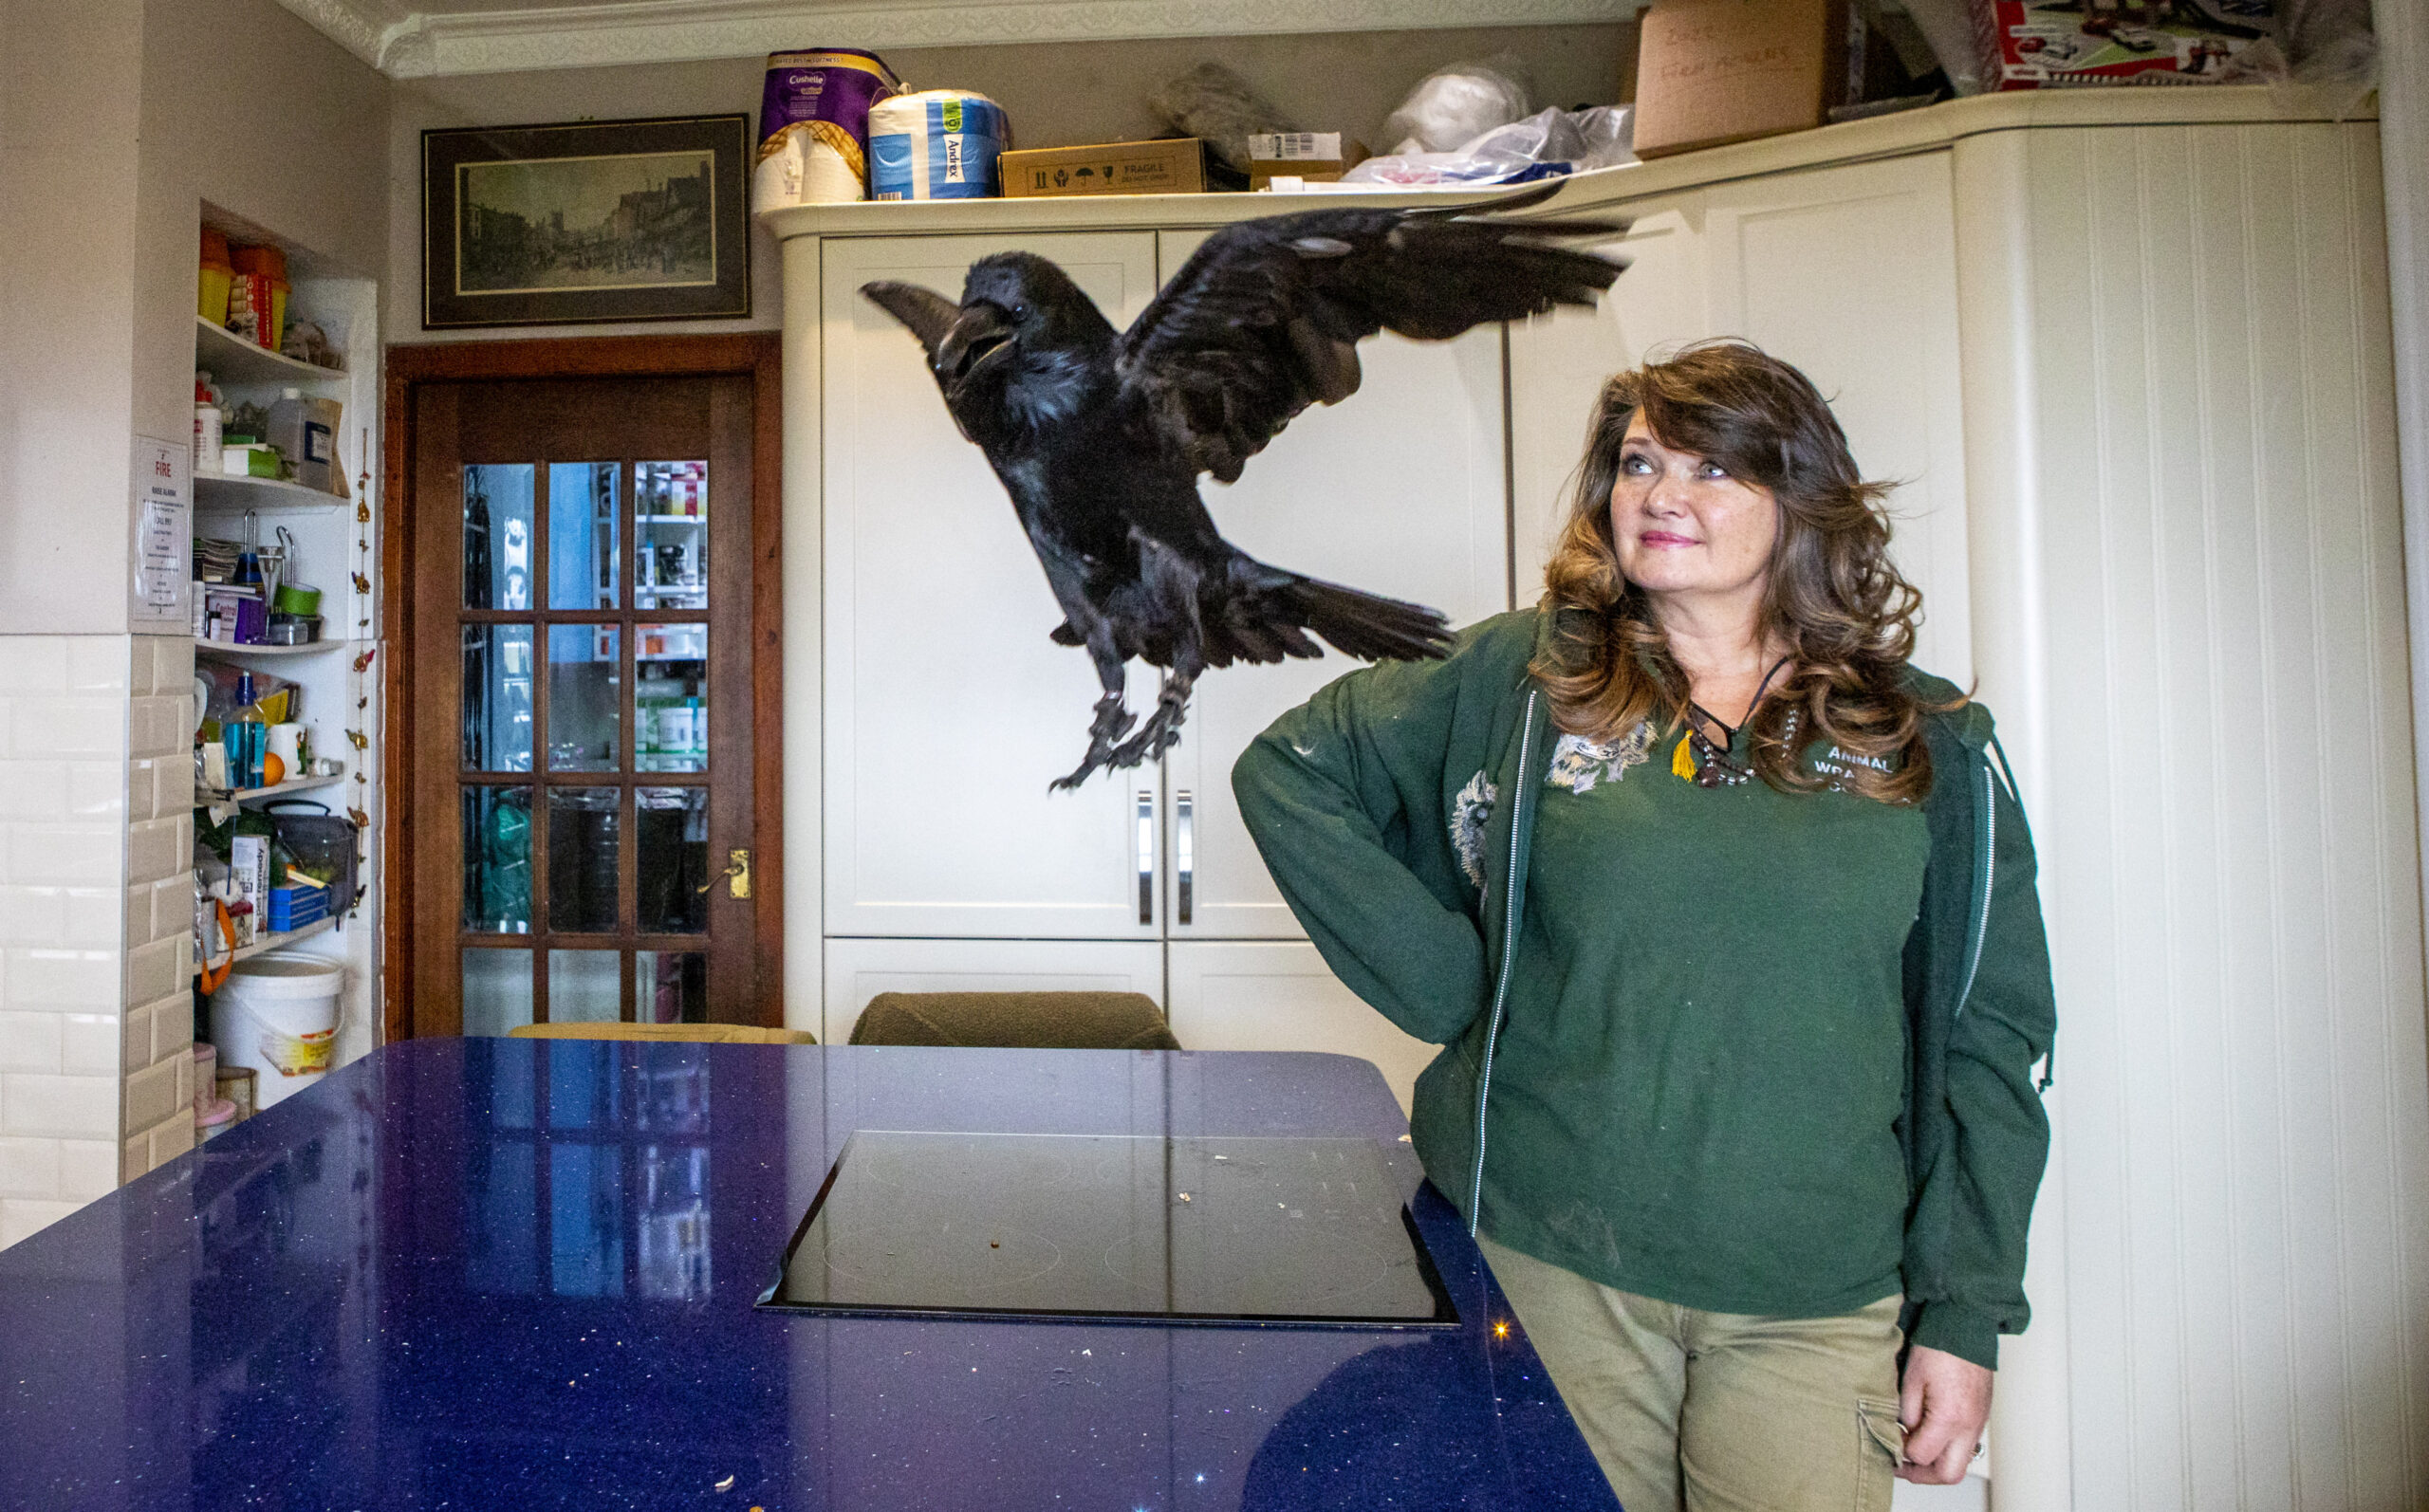 Animal wrangler Bozena Bienkowska coaxes perfect performances from her pets, including a raven and wolf-hybrid, to star in films and on TV. (Katielee Arrowsmith/Zenger)